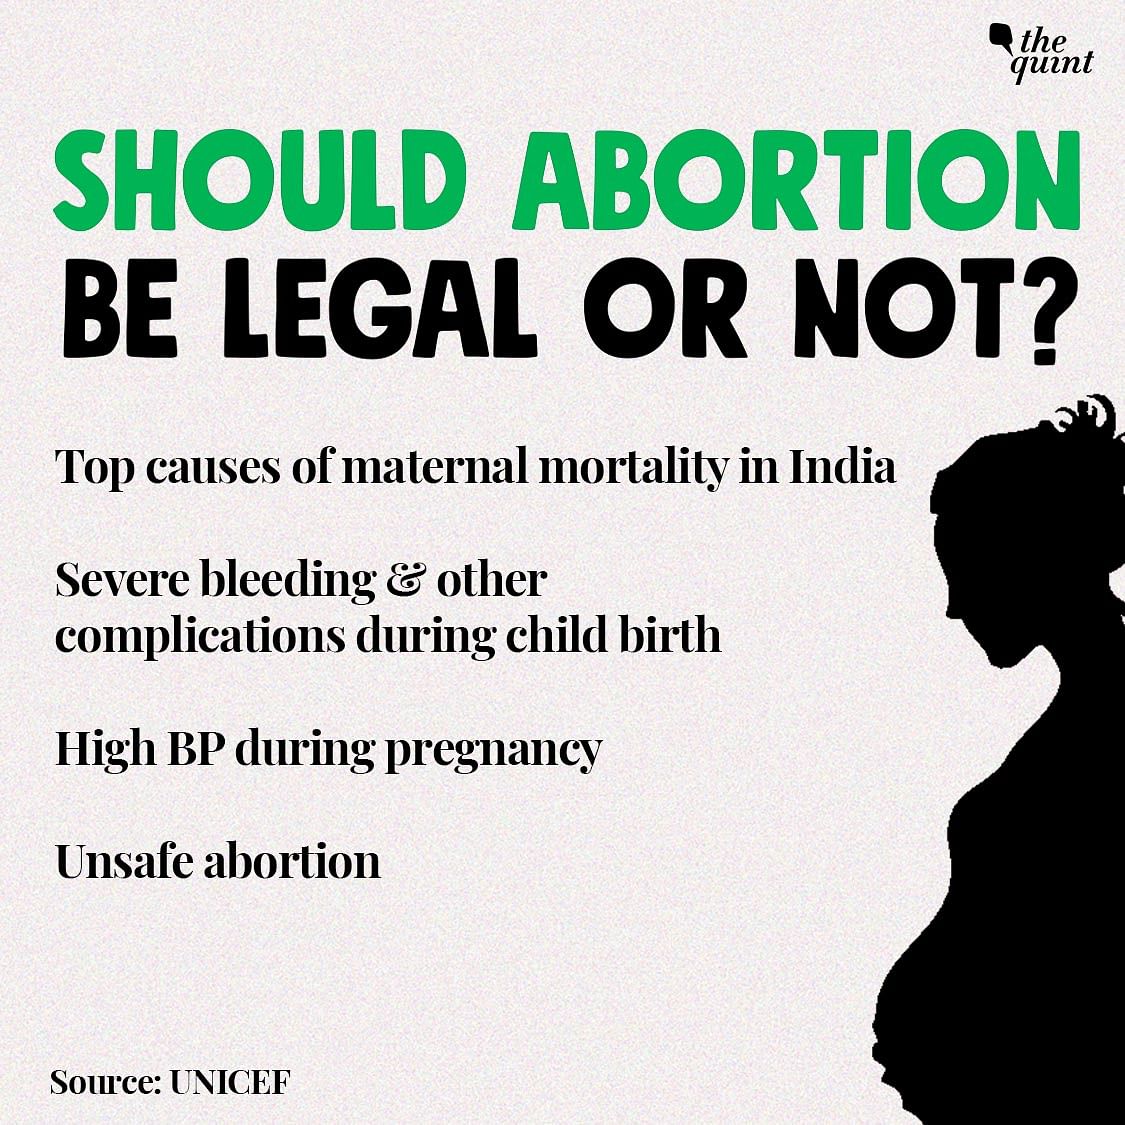 Globally, at least seven in 10 people favour legalisation of abortion.